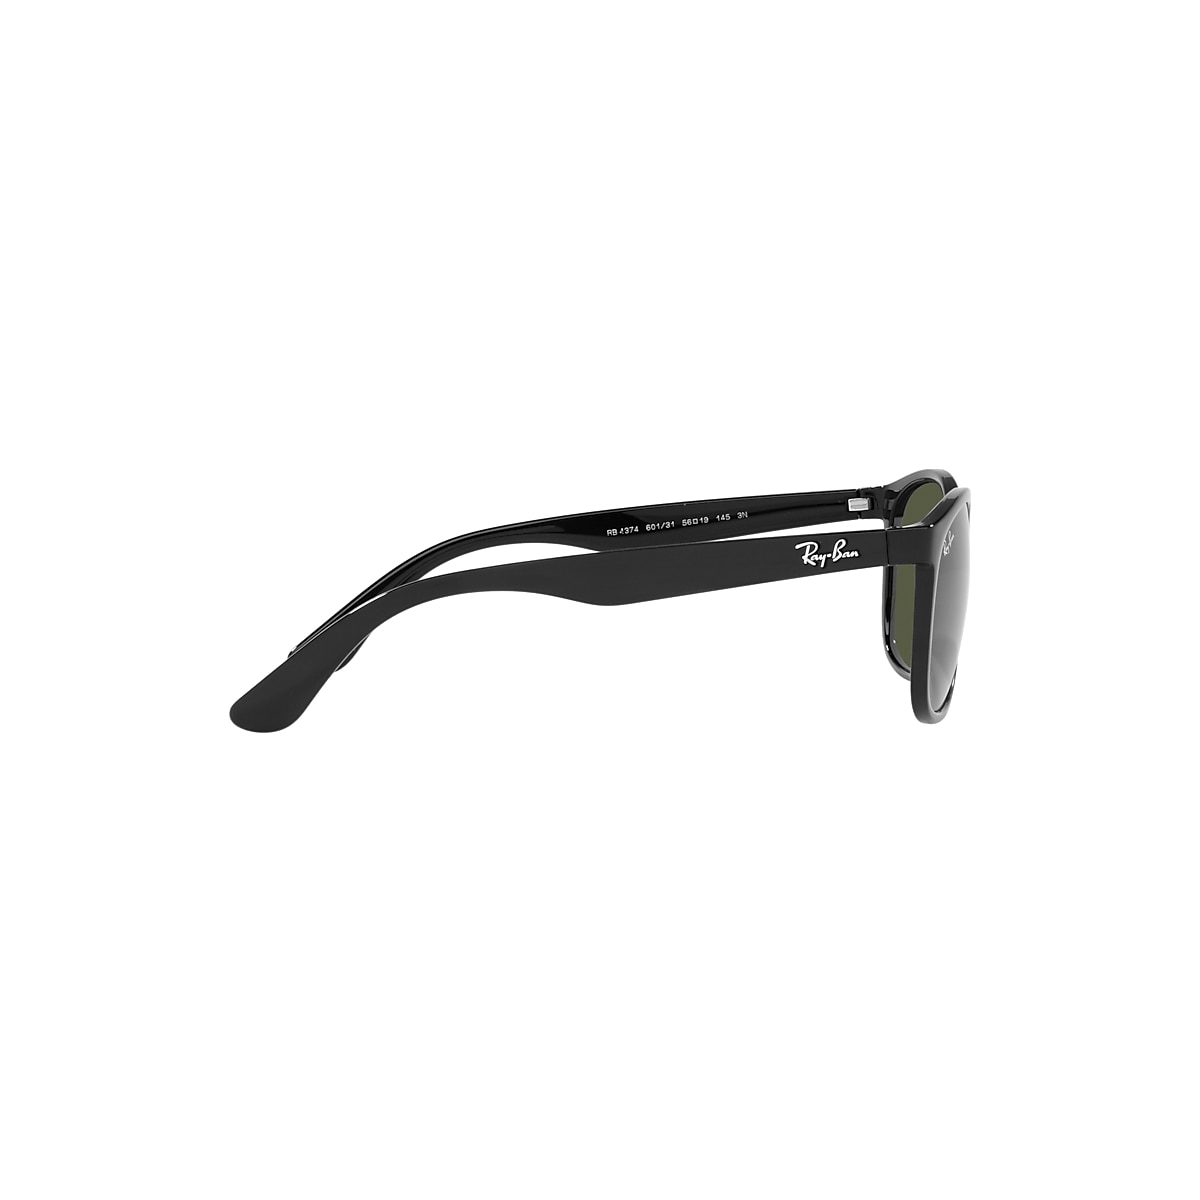 RB4374 Sunglasses in Black and Green - RB4374F | Ray-Ban® US